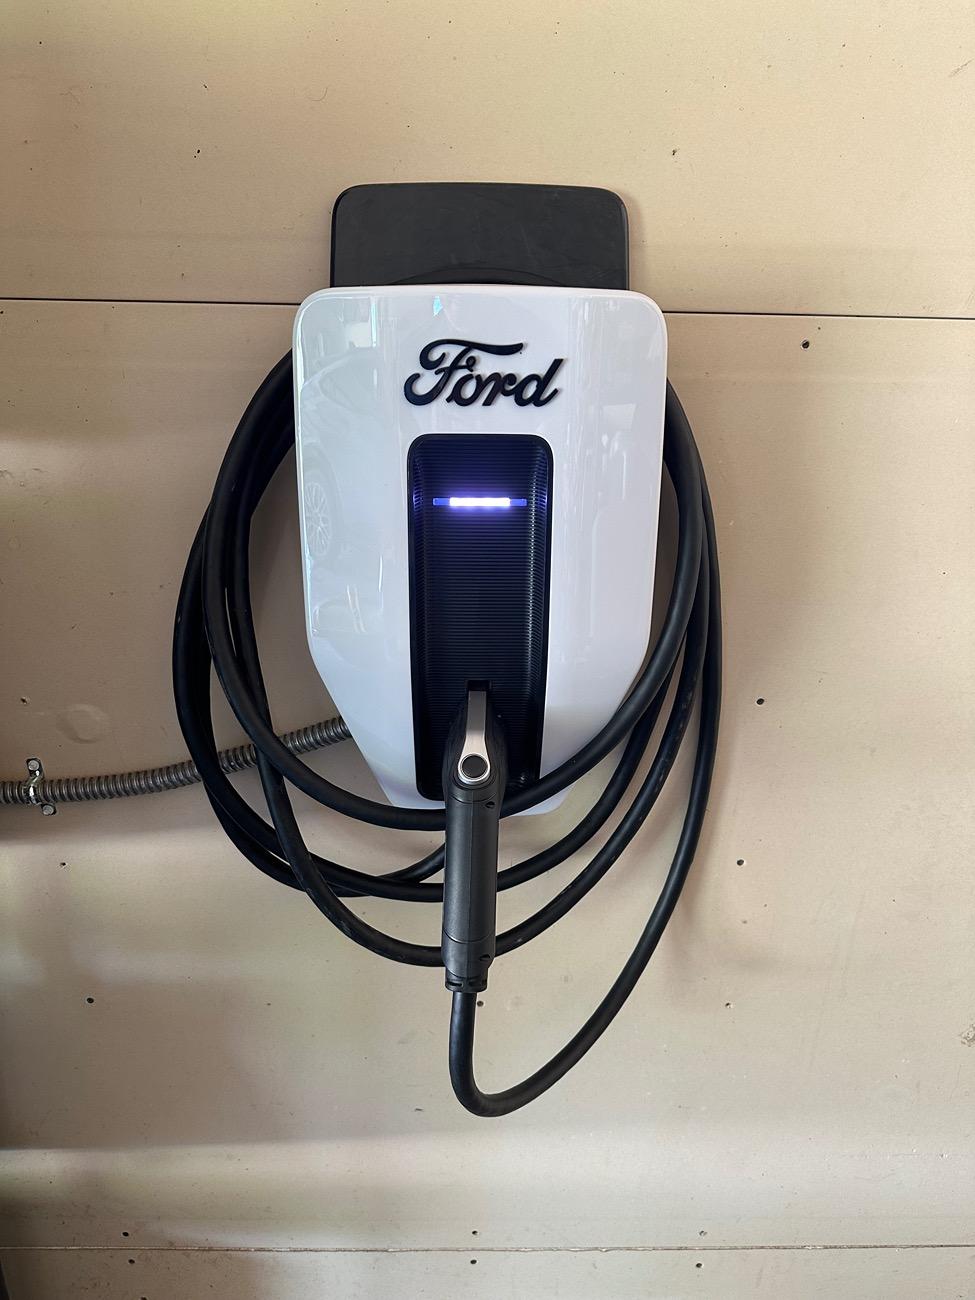 Ford F-150 Lightning For sale: Charge Station Pro ($350 - used, like new) IMG_4456